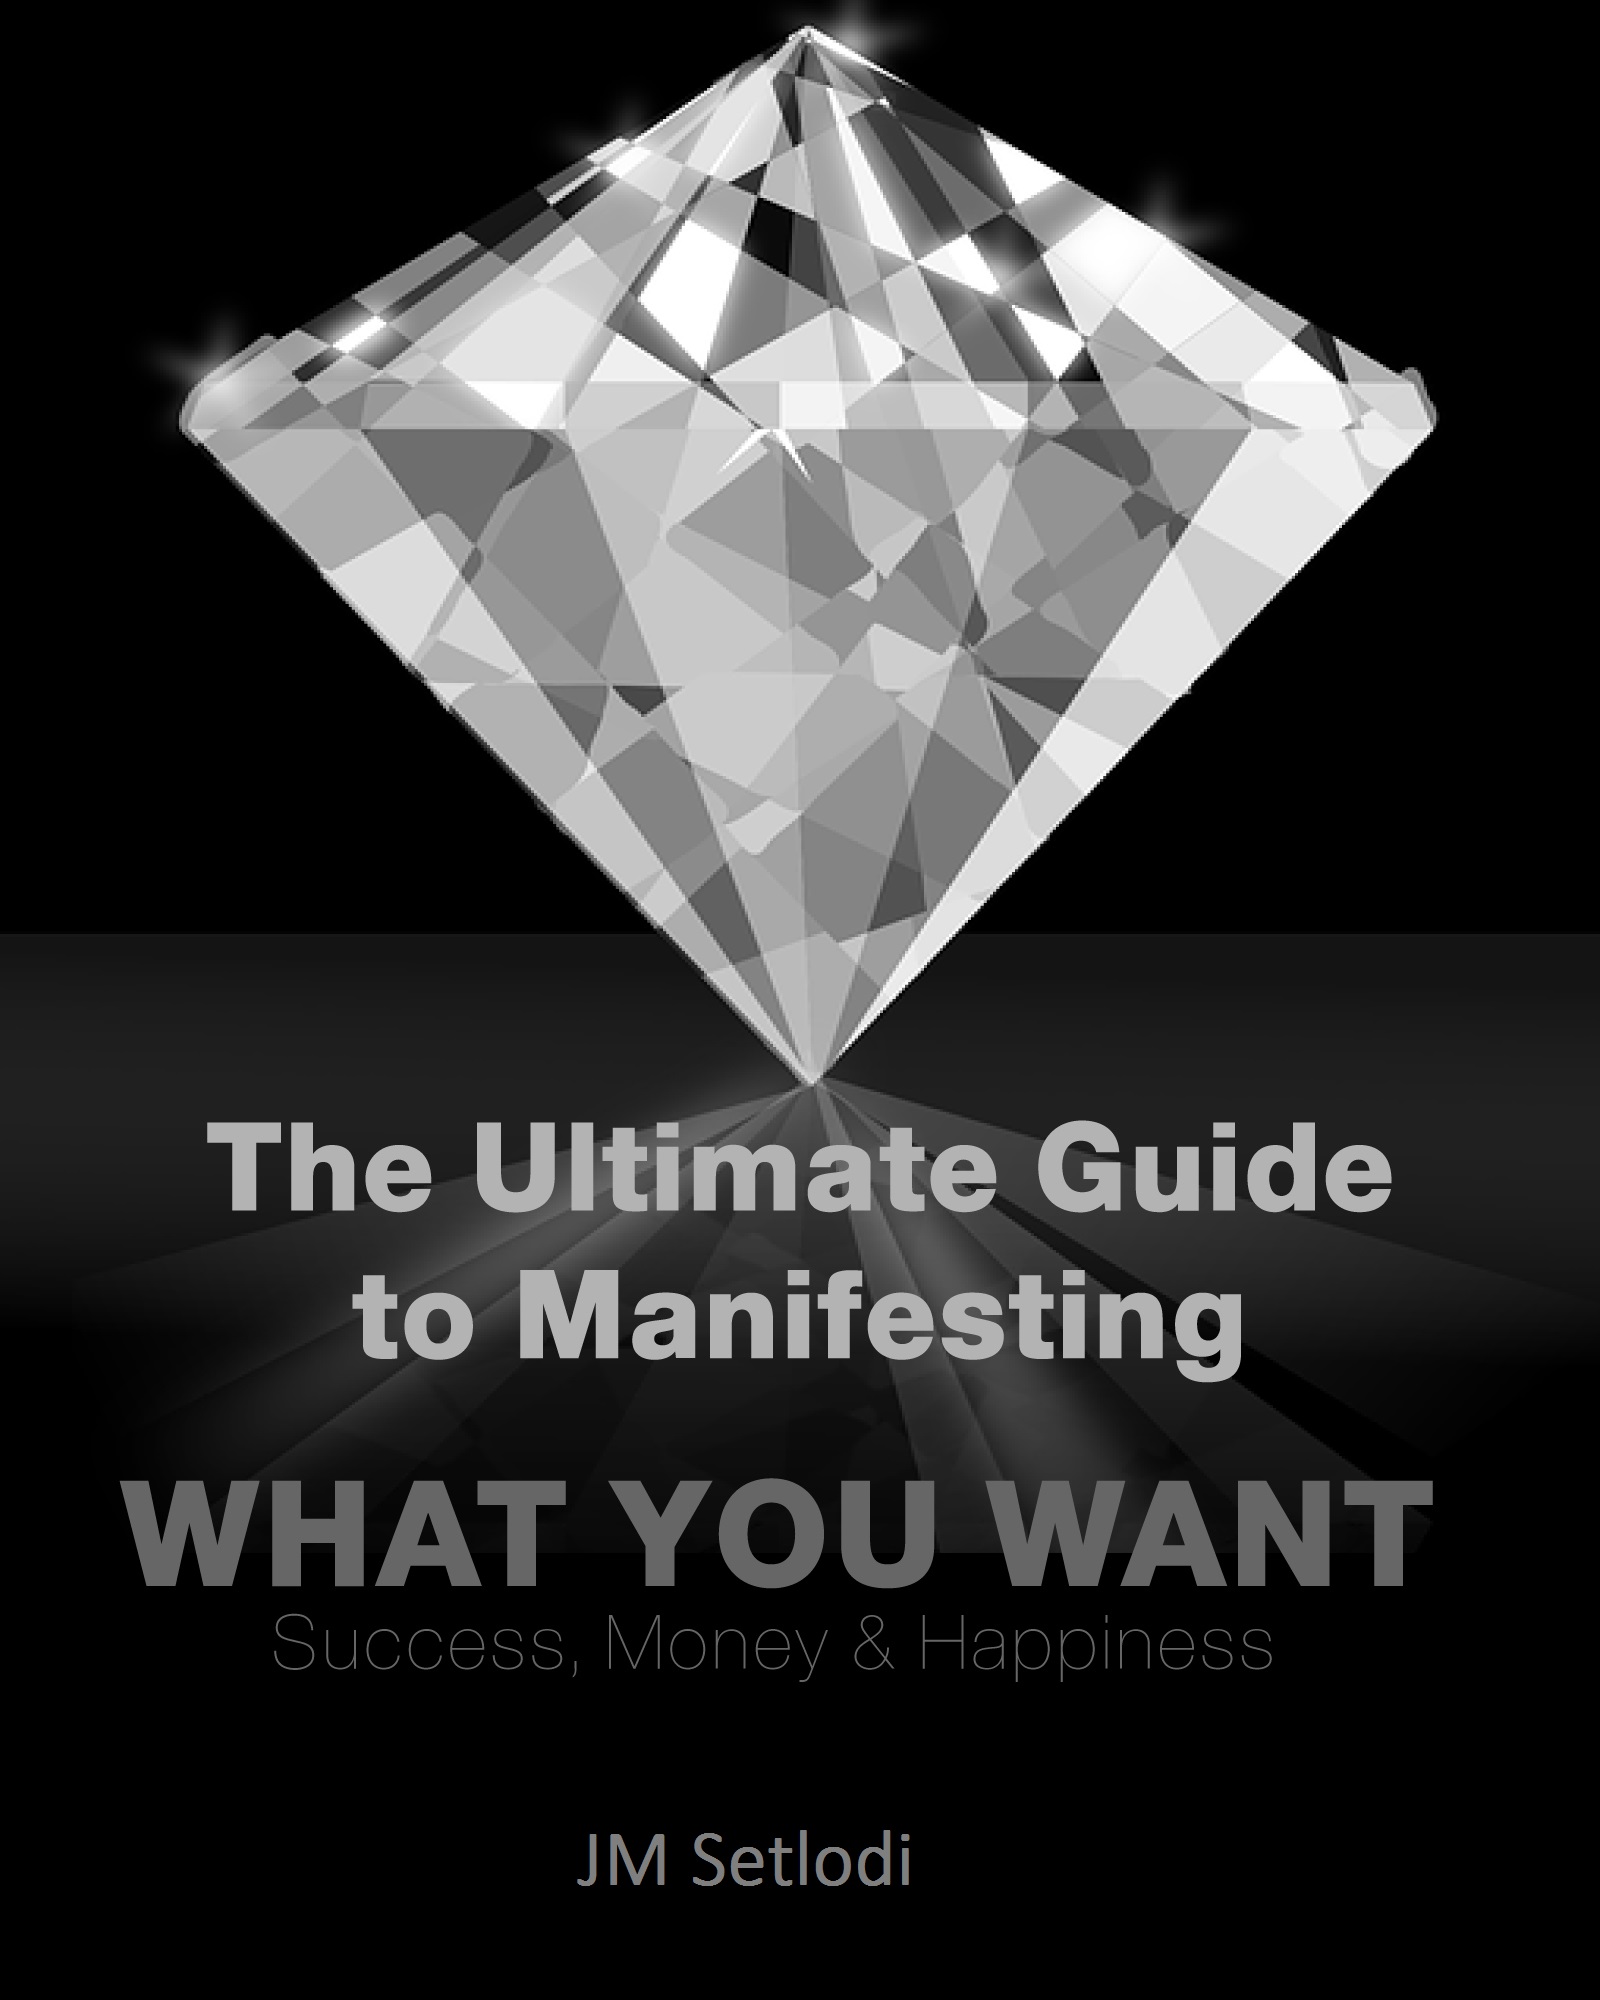 FREE: The Ultimate Guide to Manifesting by JM Setlodi